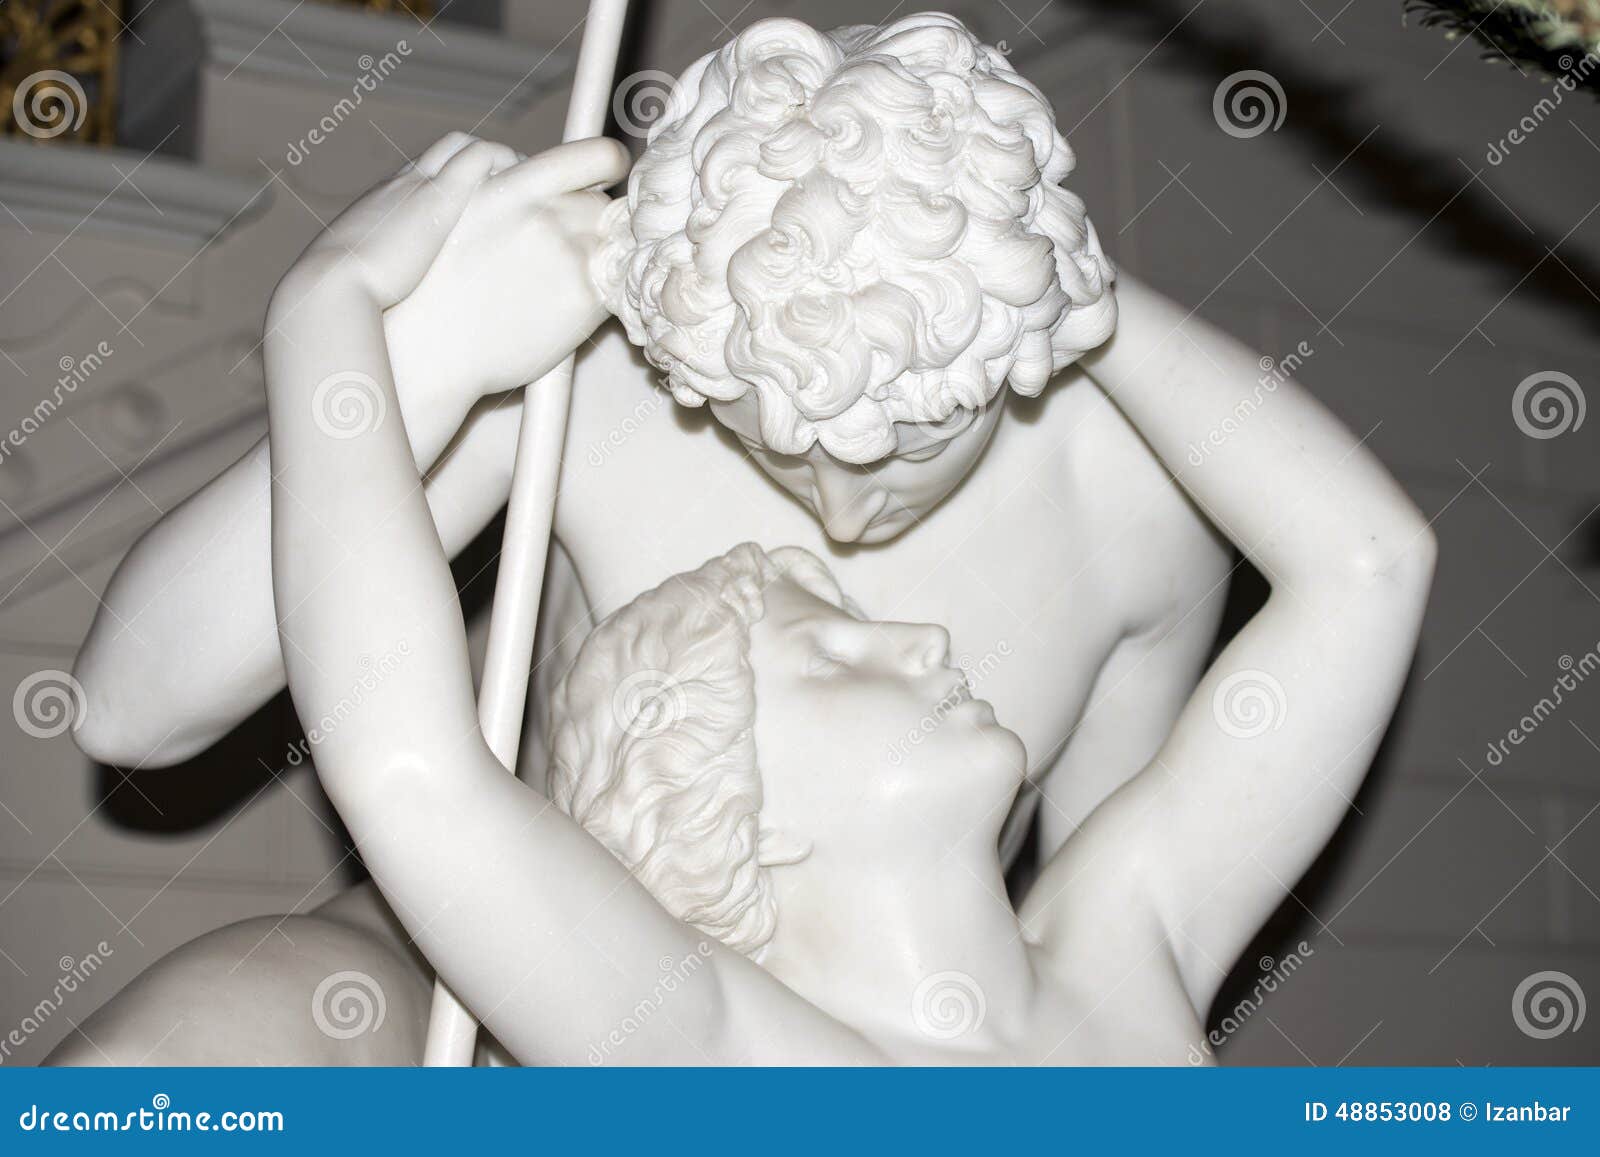 the fisher love and psyche statue style